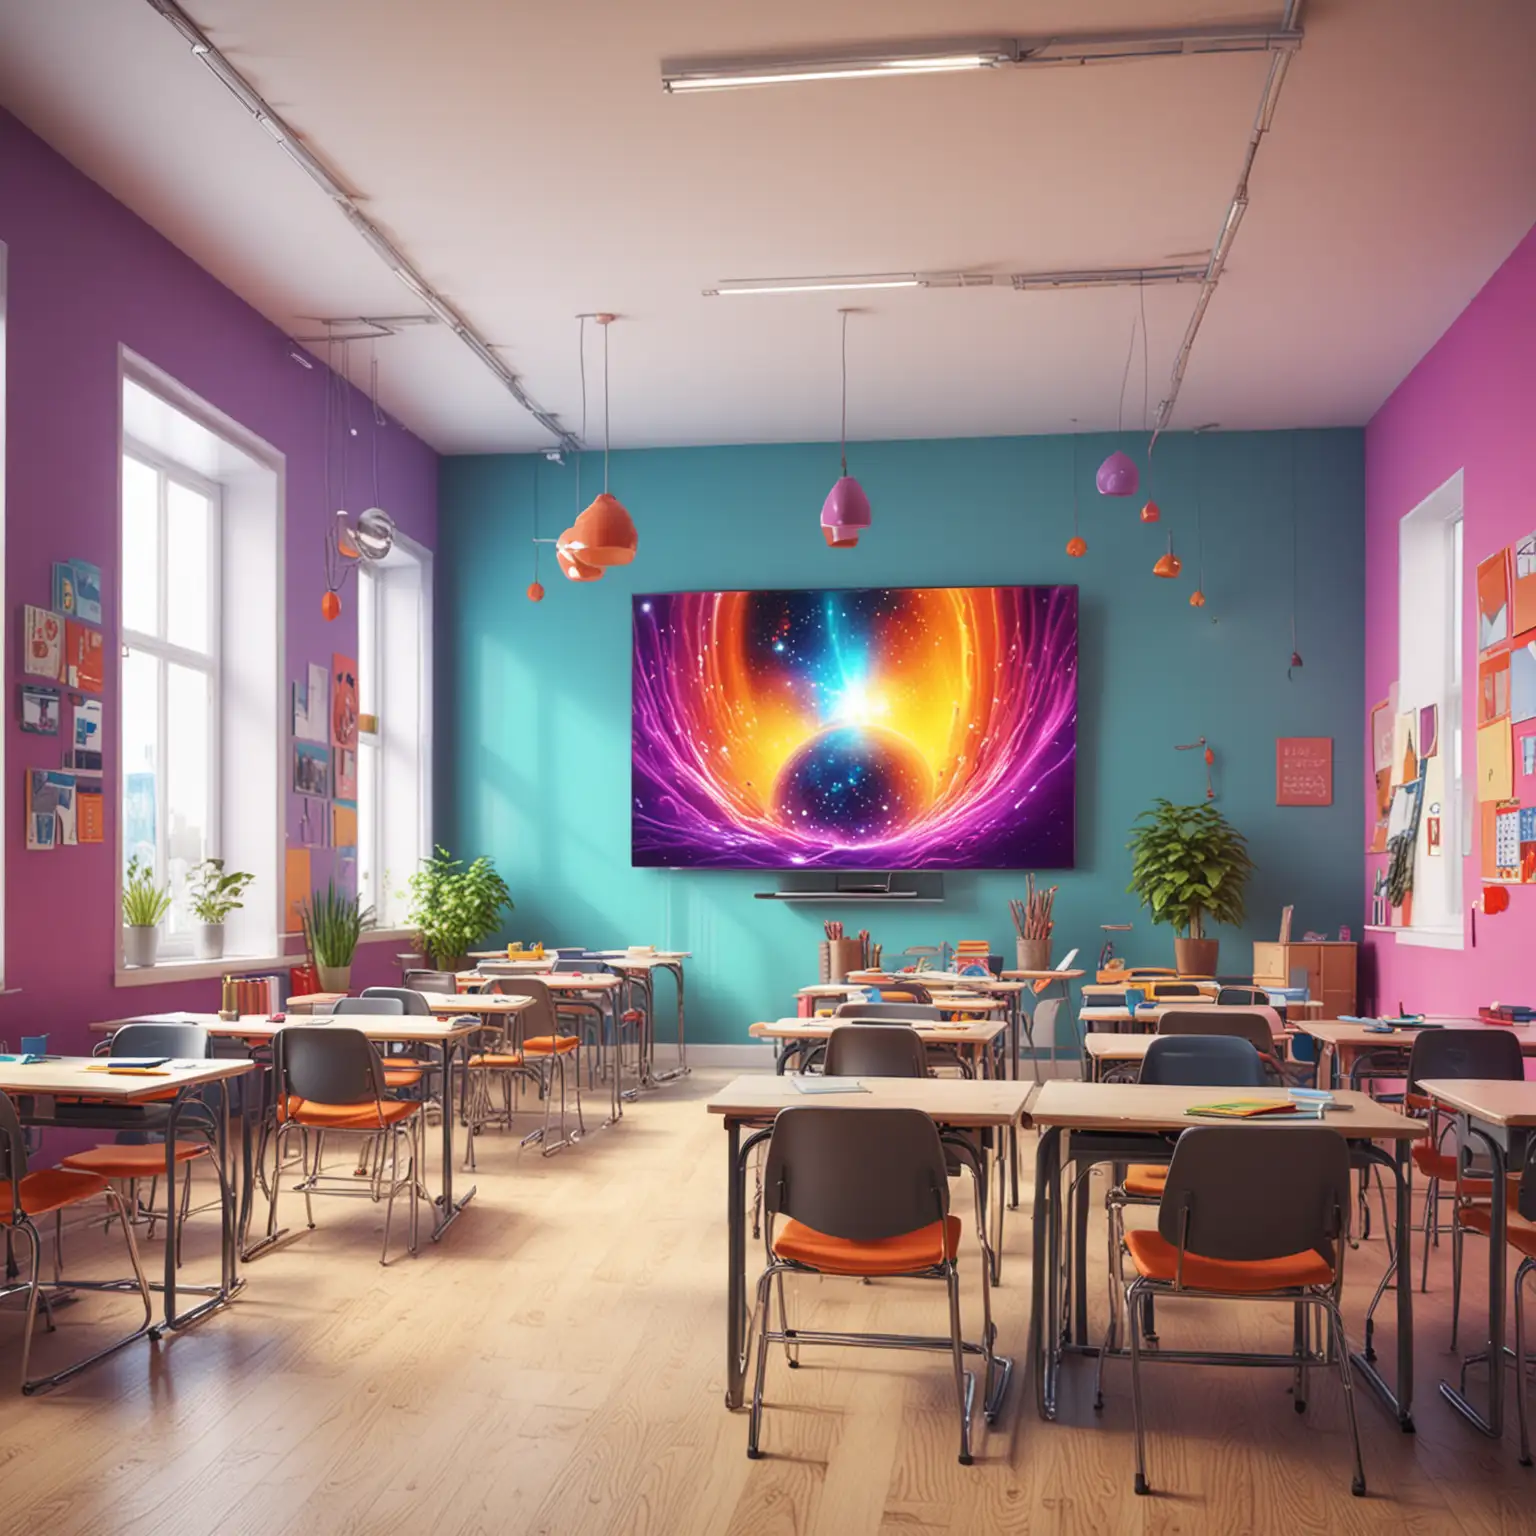 Cheerful Classroom with Futuristic Technology